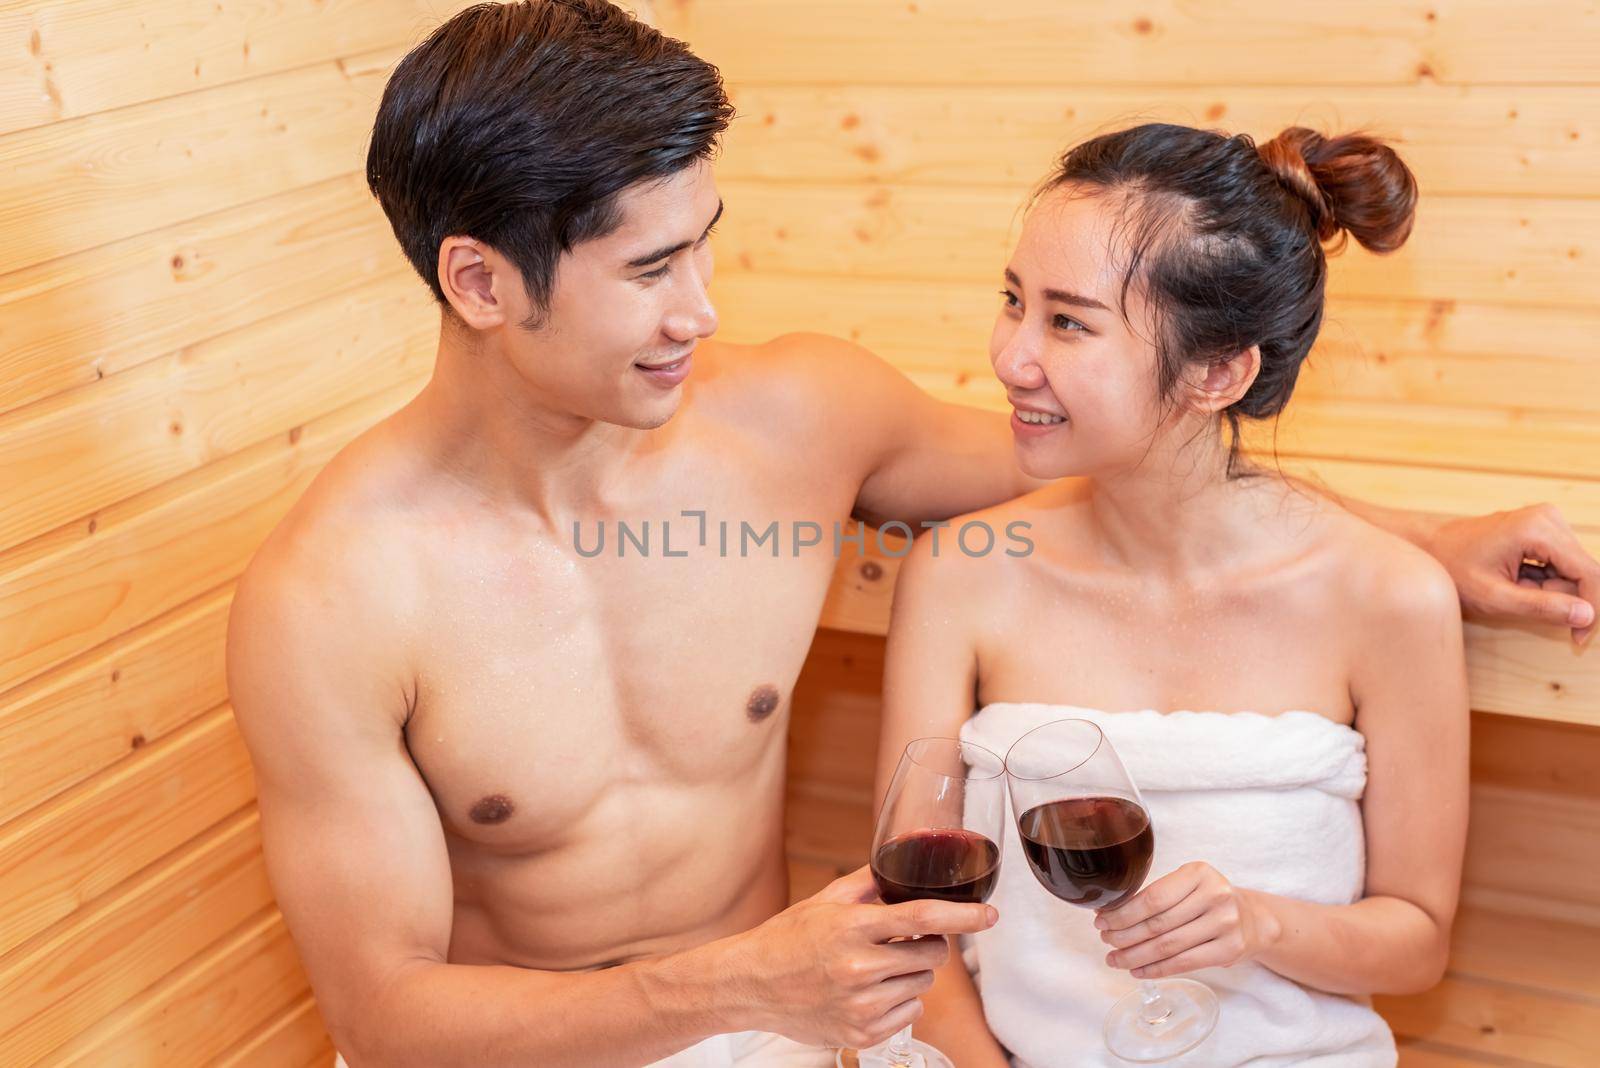 Asian couples toasting and drinking wine in sauna room for celebrating wedding anniversary. Healthy skin heat treatment with steam sauna concept. Holiday and Relax. People lifestyles together